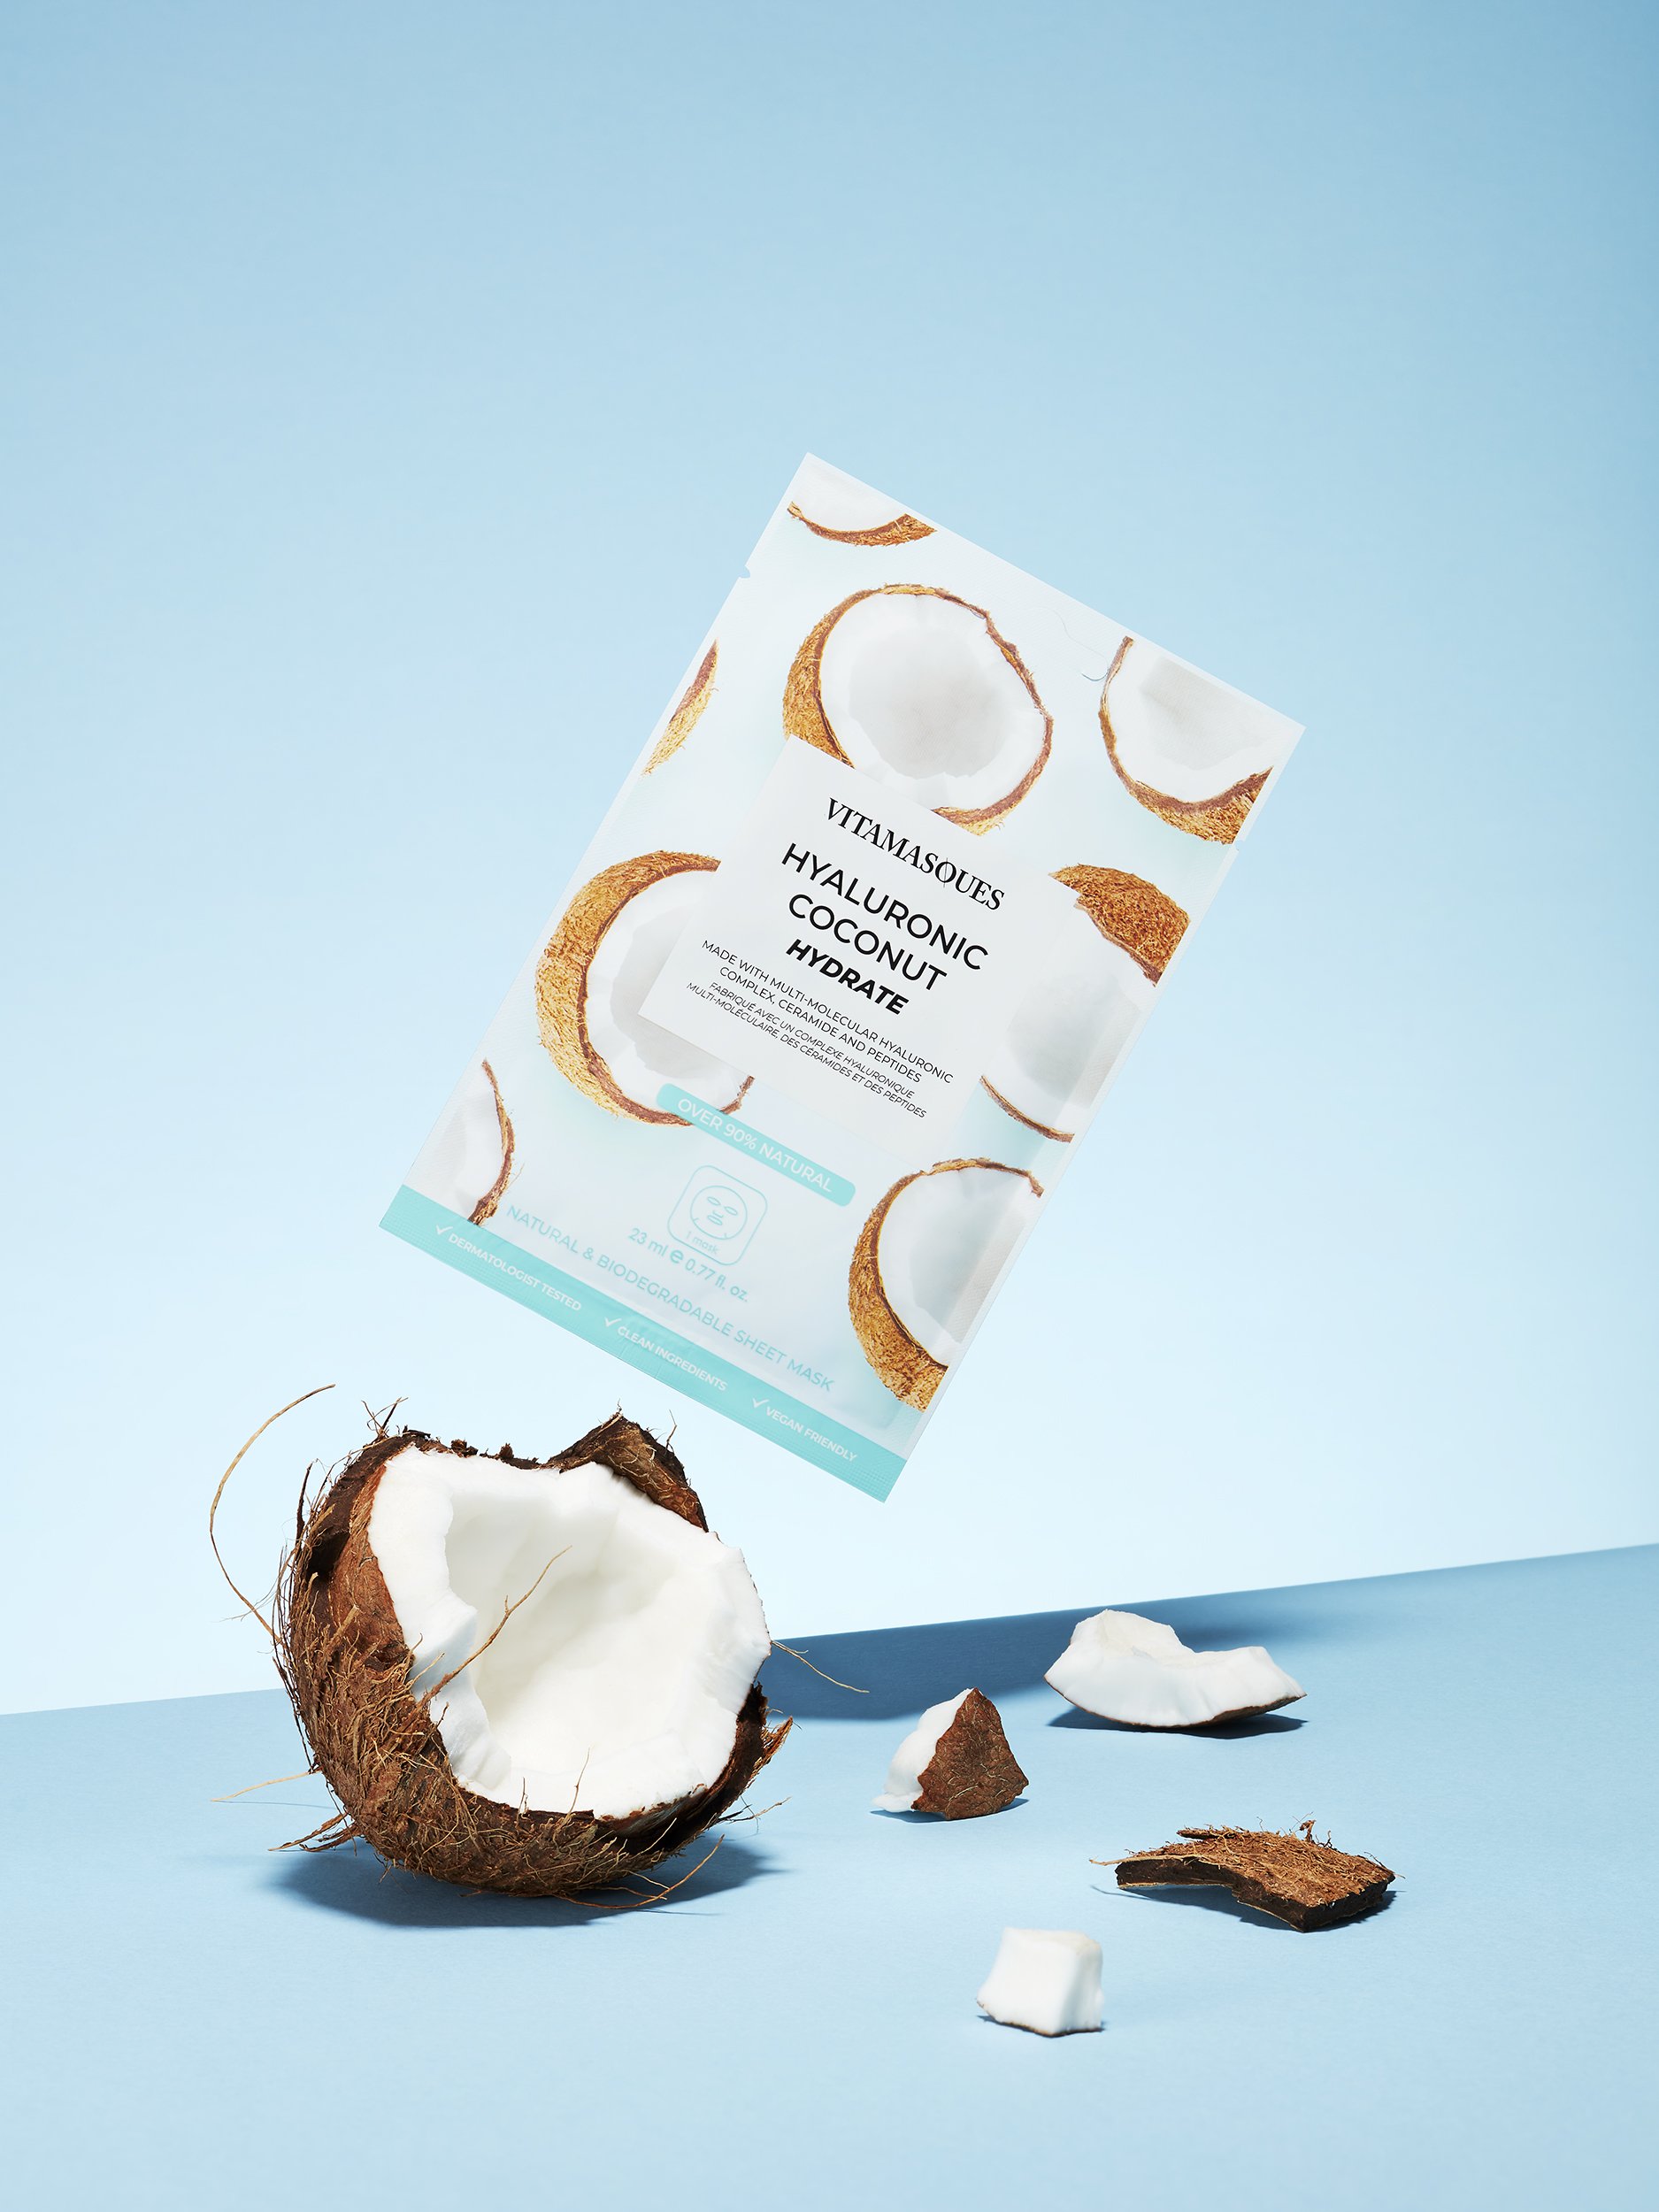 Vitamasques Hyaluronic Coconut - photographer Simon Lyle Ritchie